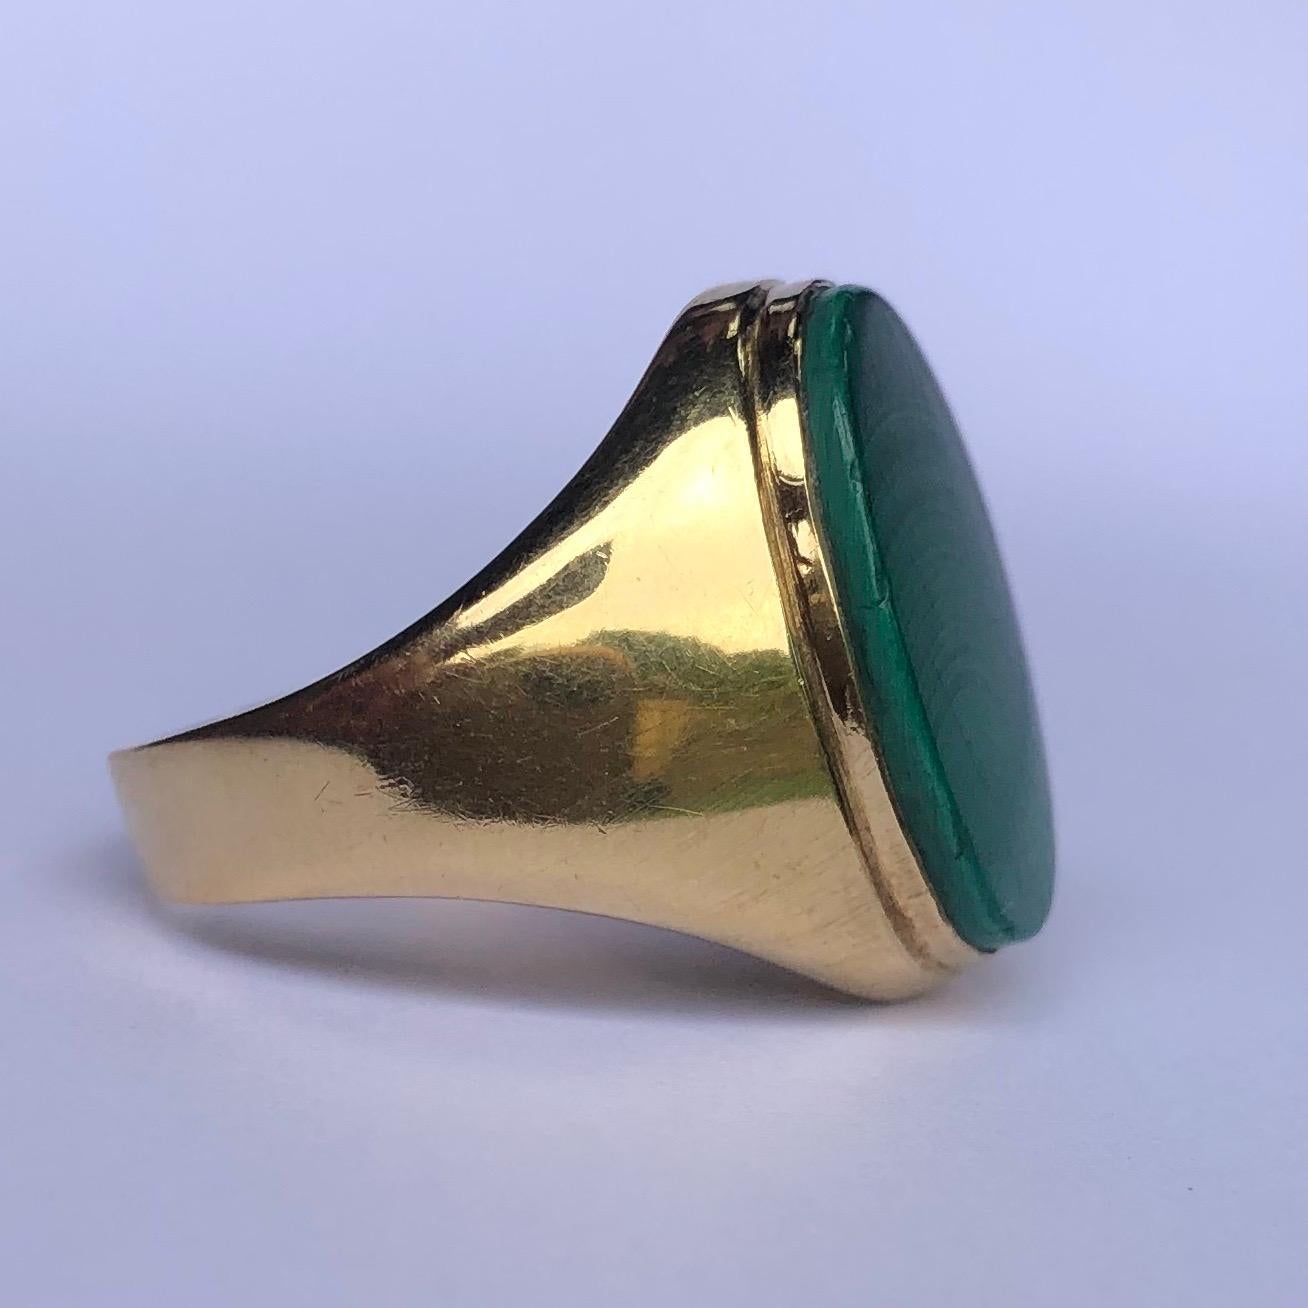 The malachite stone in this 18ct gold ring is bright and has beautiful banding running through it. The green is complimented perfectly by the glossy yellow gold. 

Ring Size: S or 9
Stone Dimensions: 18x13mm 

Weight: 5.6g